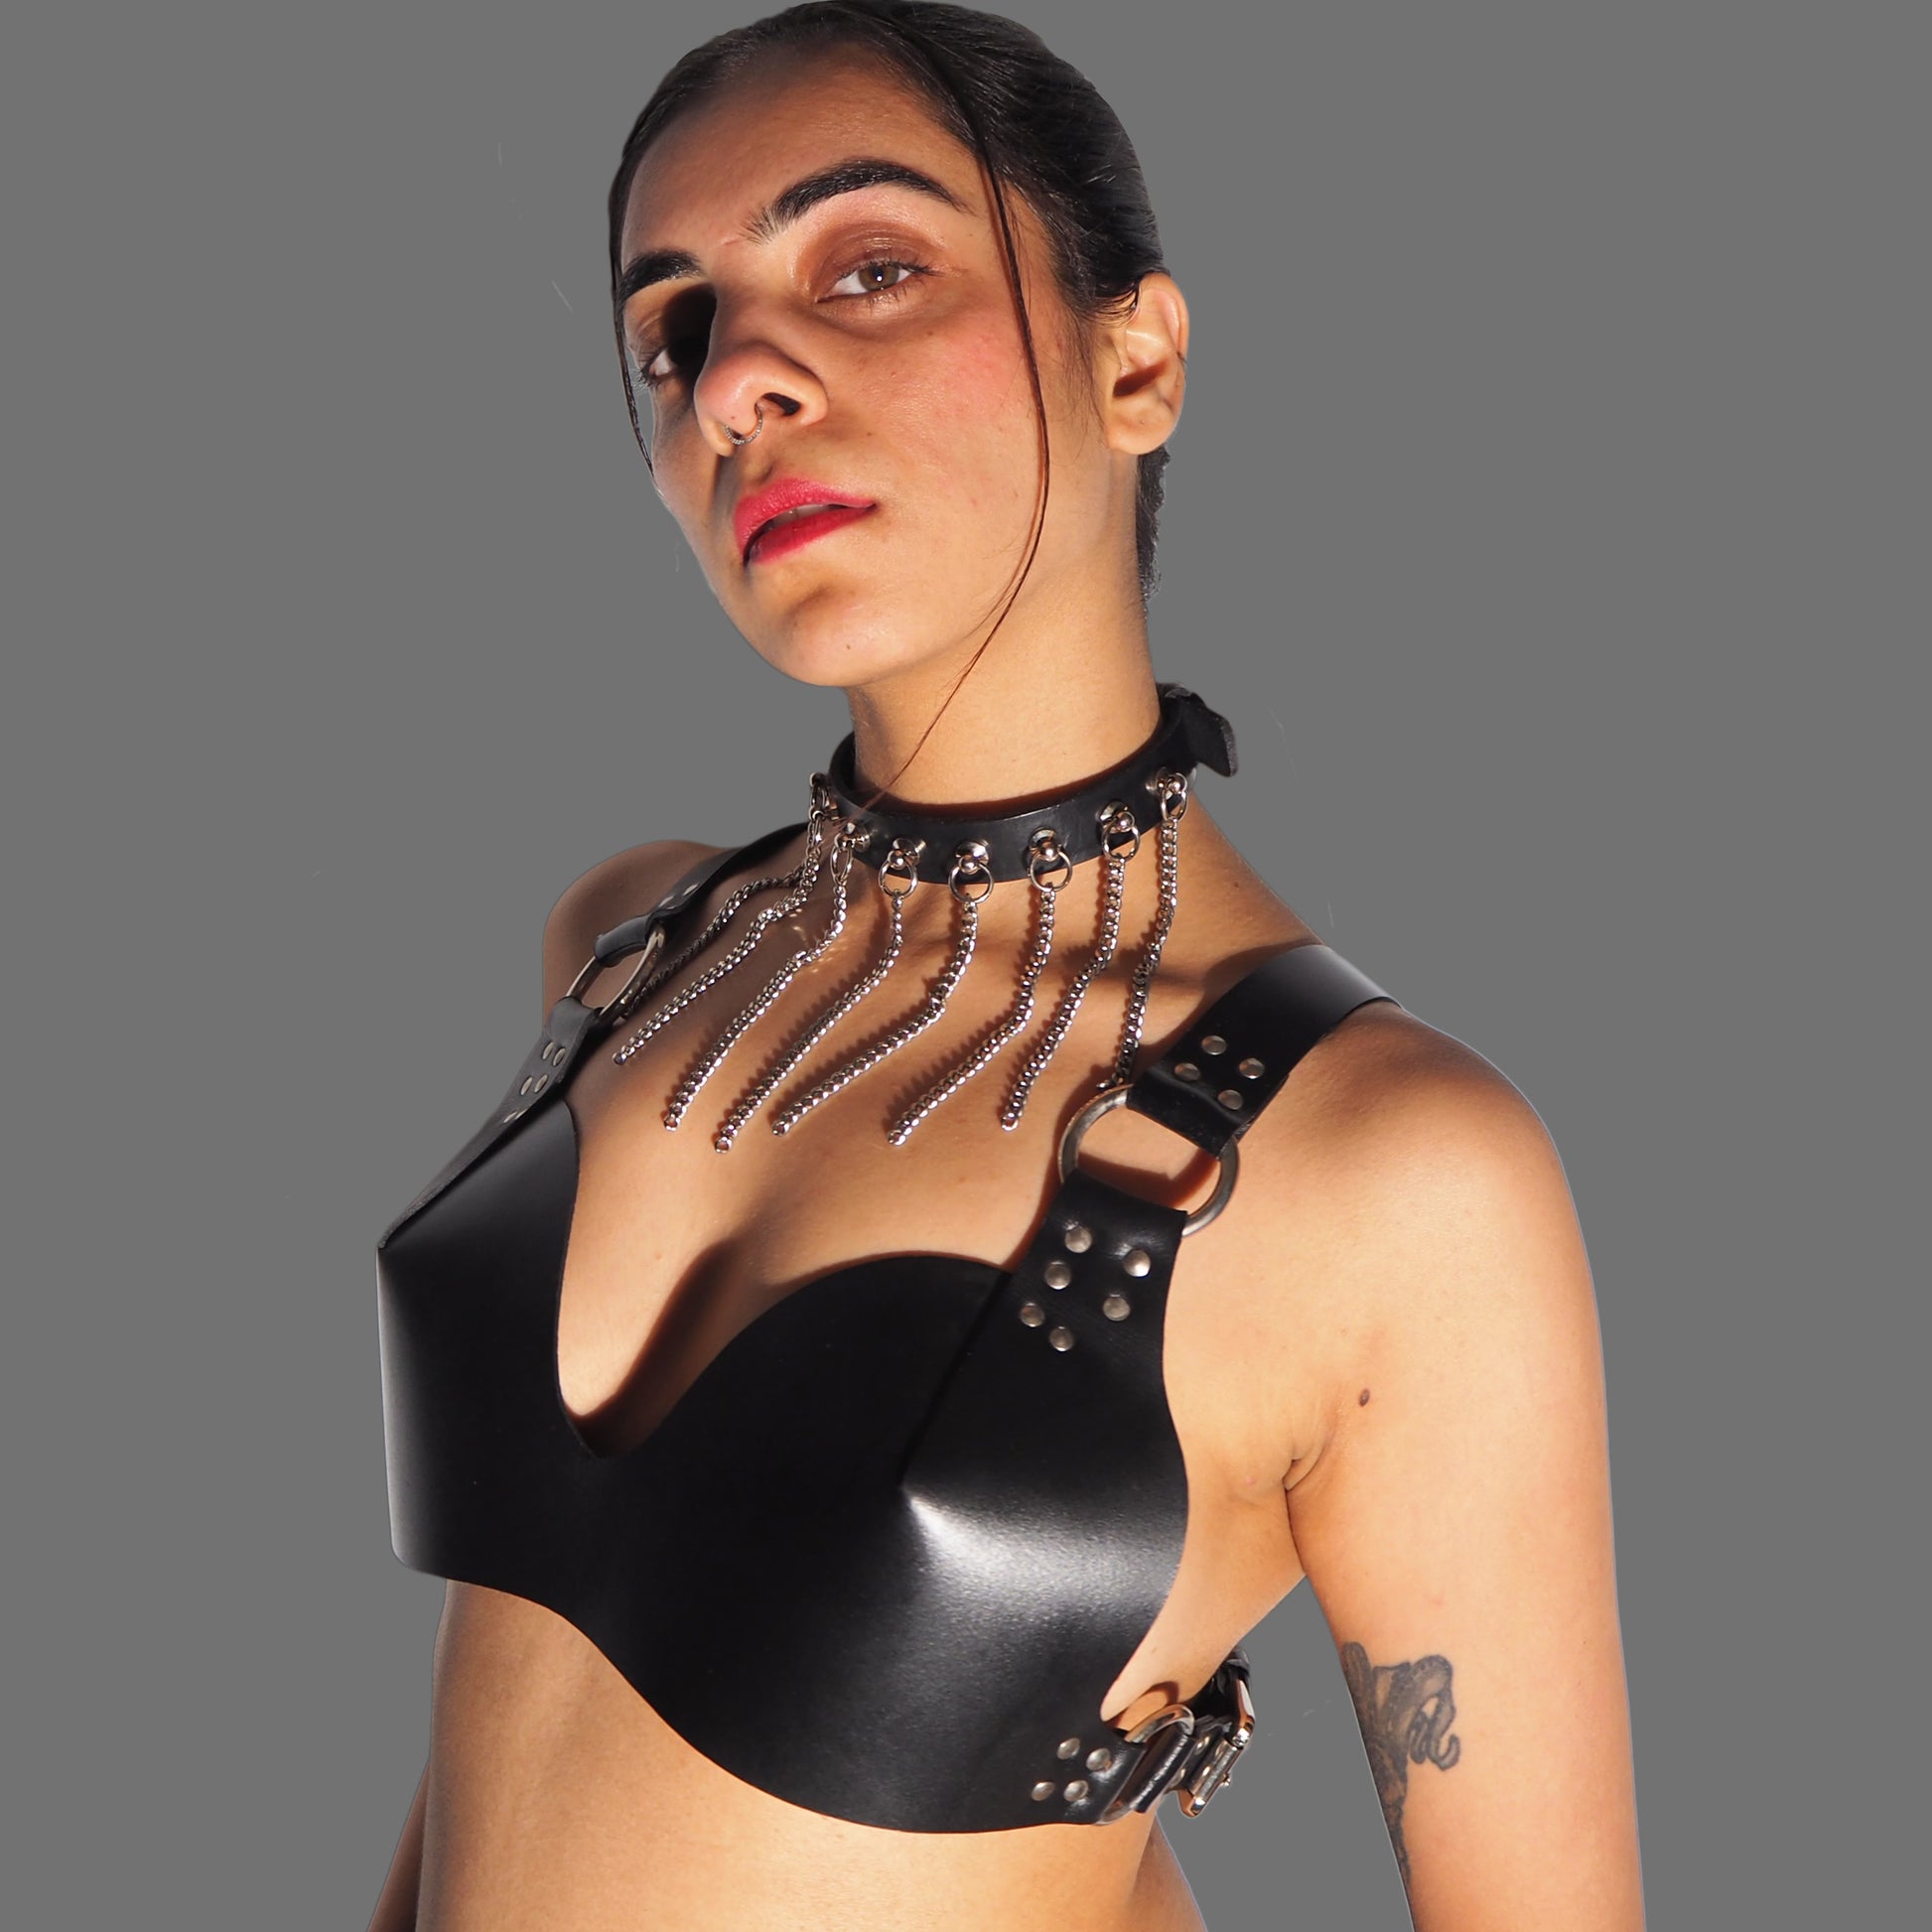 SUBCULTURE LEATHER BRALETTE - Subculture